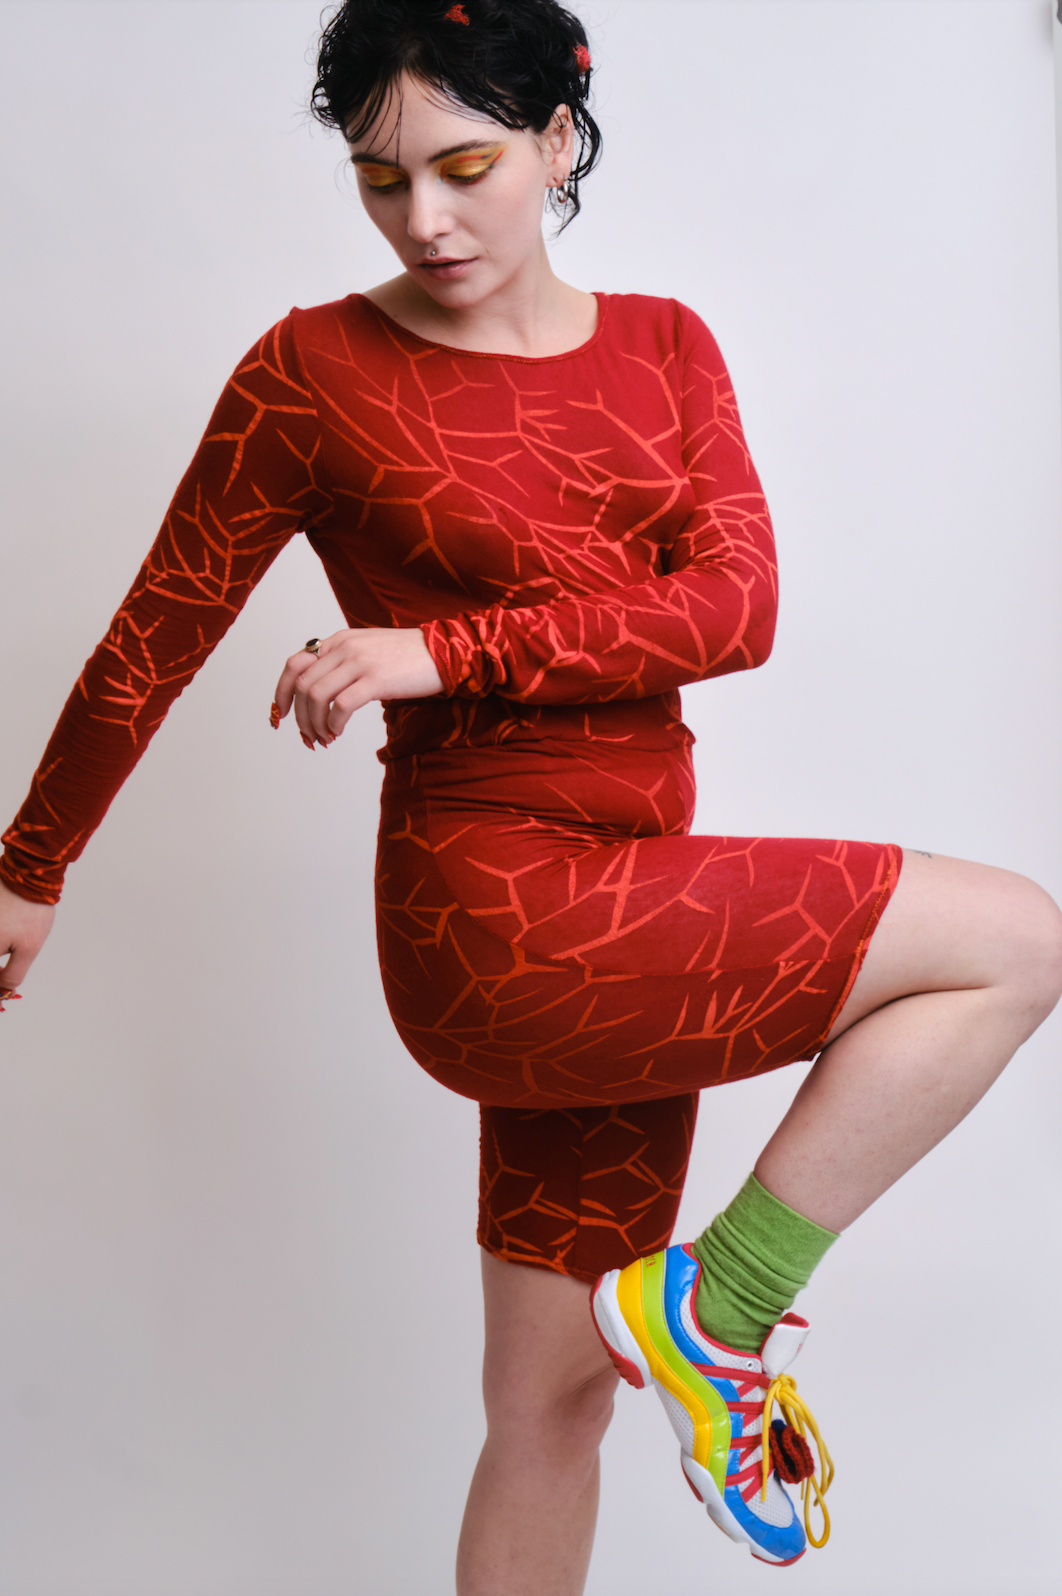 Model wearing a red, abstract printed two-piece active wear set. The model is posed with one arm crossed against their torso, and their opposite leg bent in an upright position. The model wears a long-sleeve shirt with matching biker shorts, green socks and colorful sneakers.